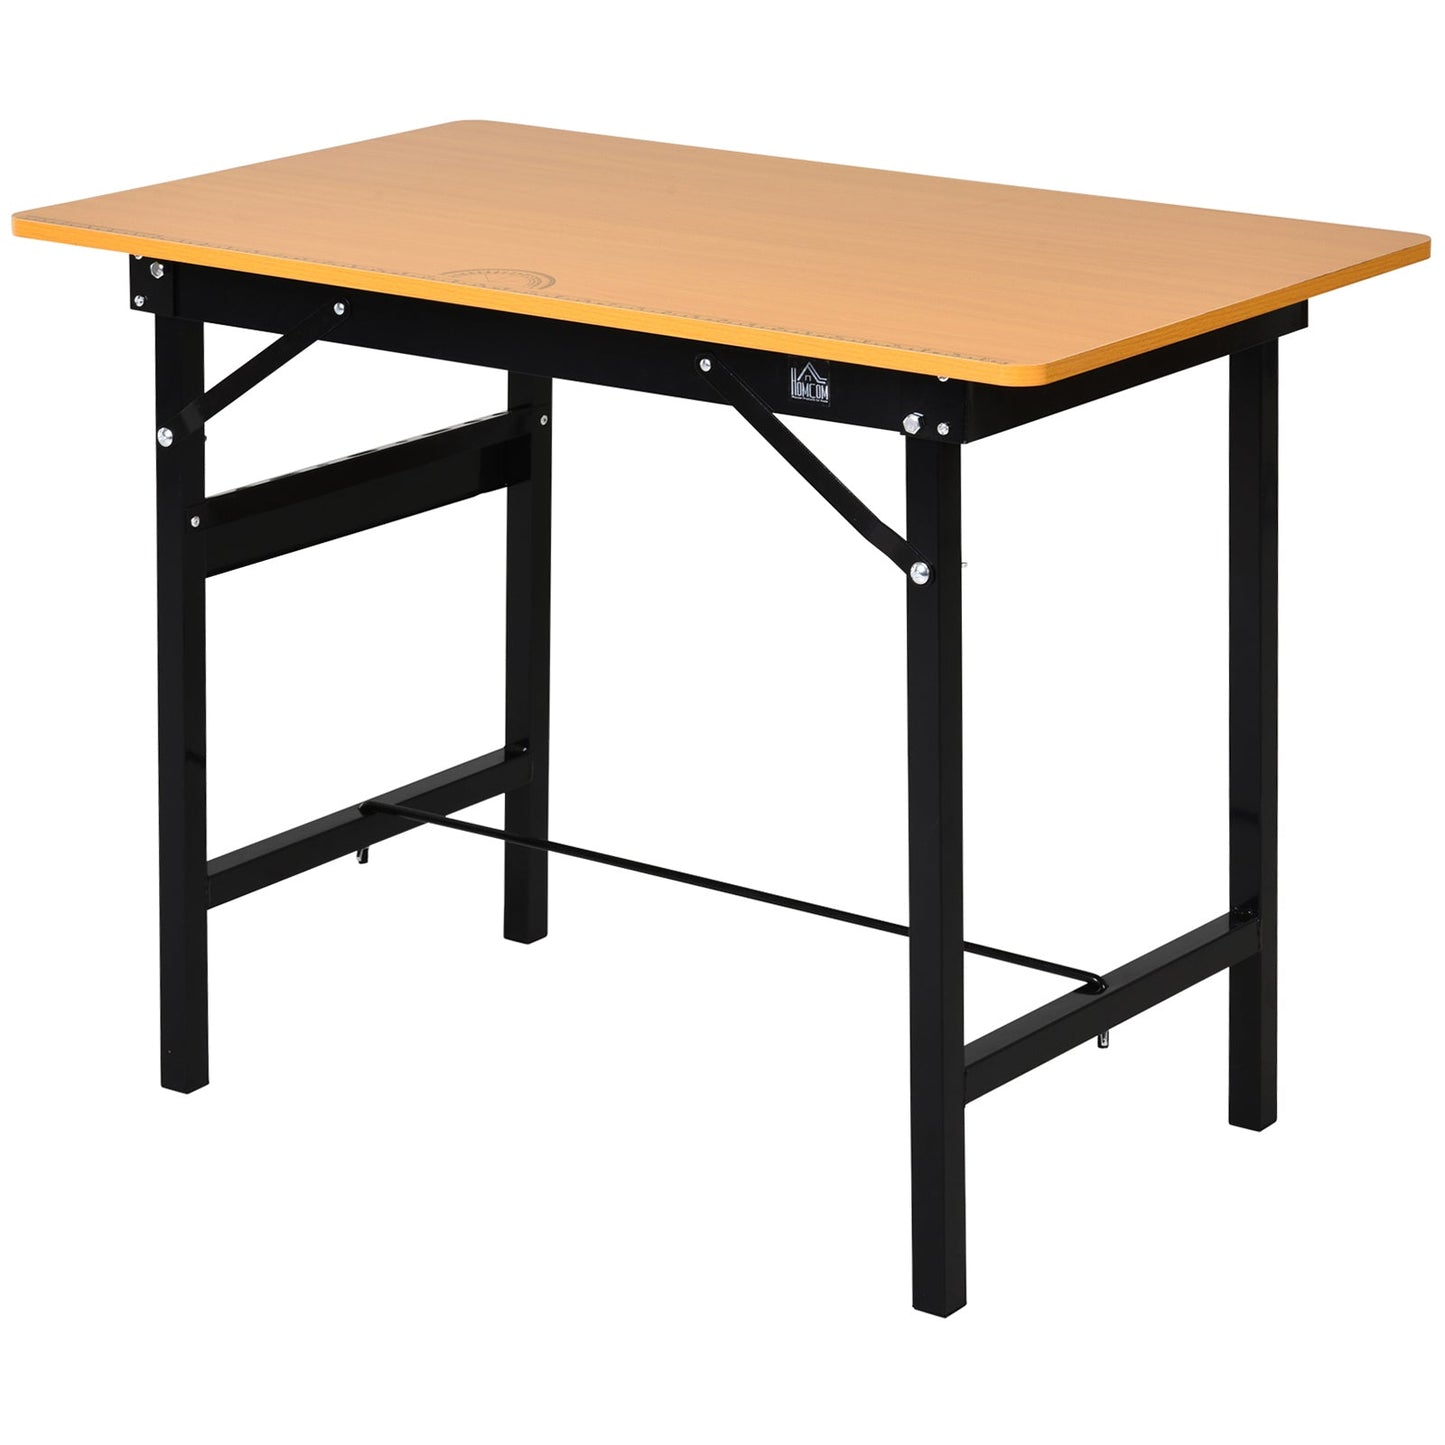 Foldable Work Table For DIY in steel and MDF 100L x 60p x 75.5acm